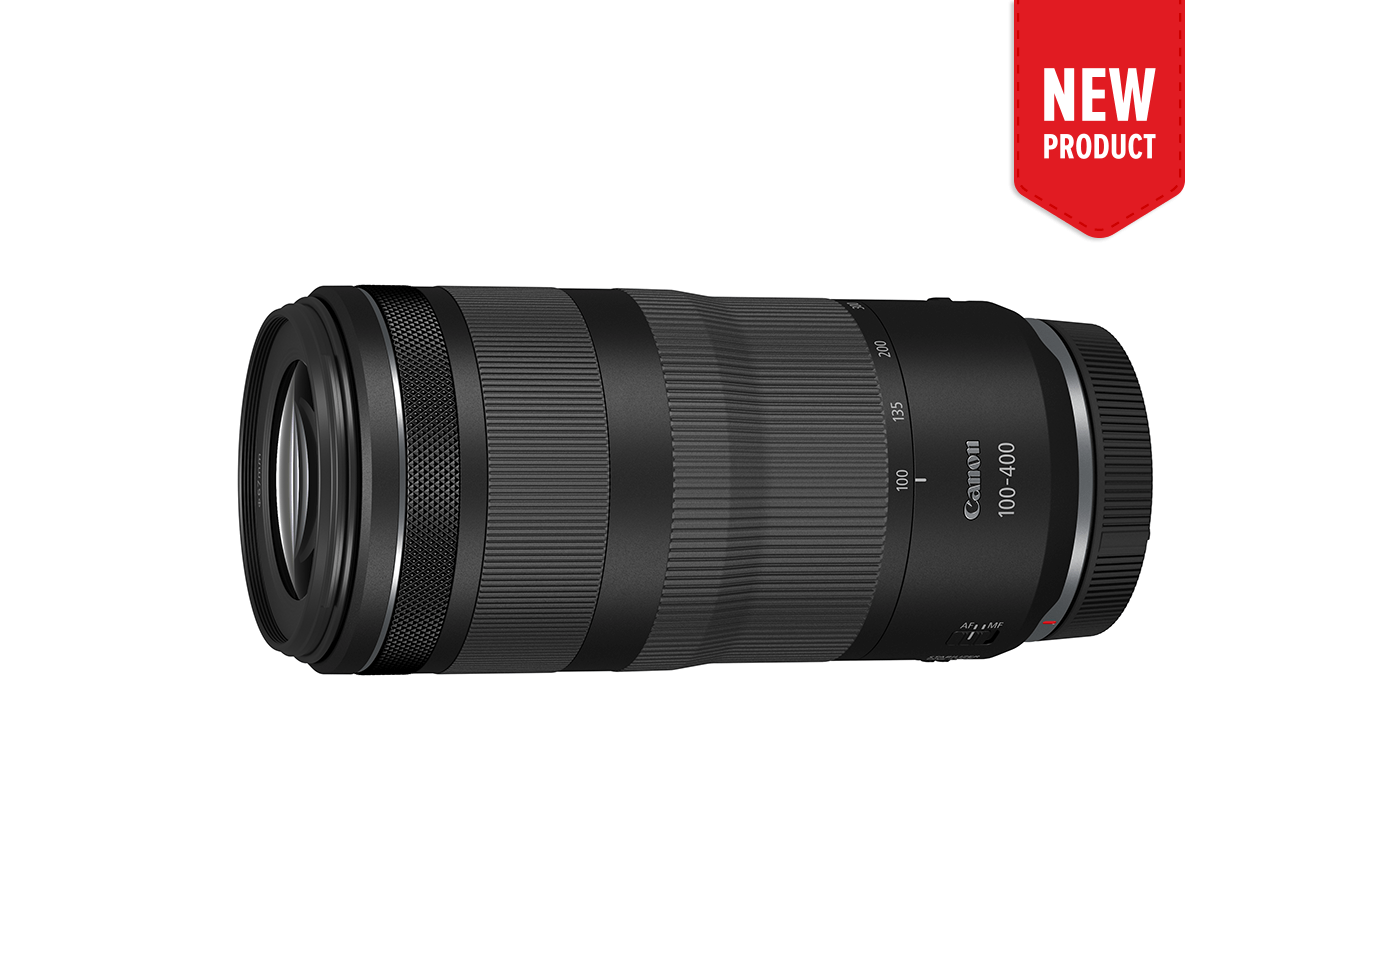 Product image of the new RF 100-400mm F5.6-8 IS USM telephoto lens